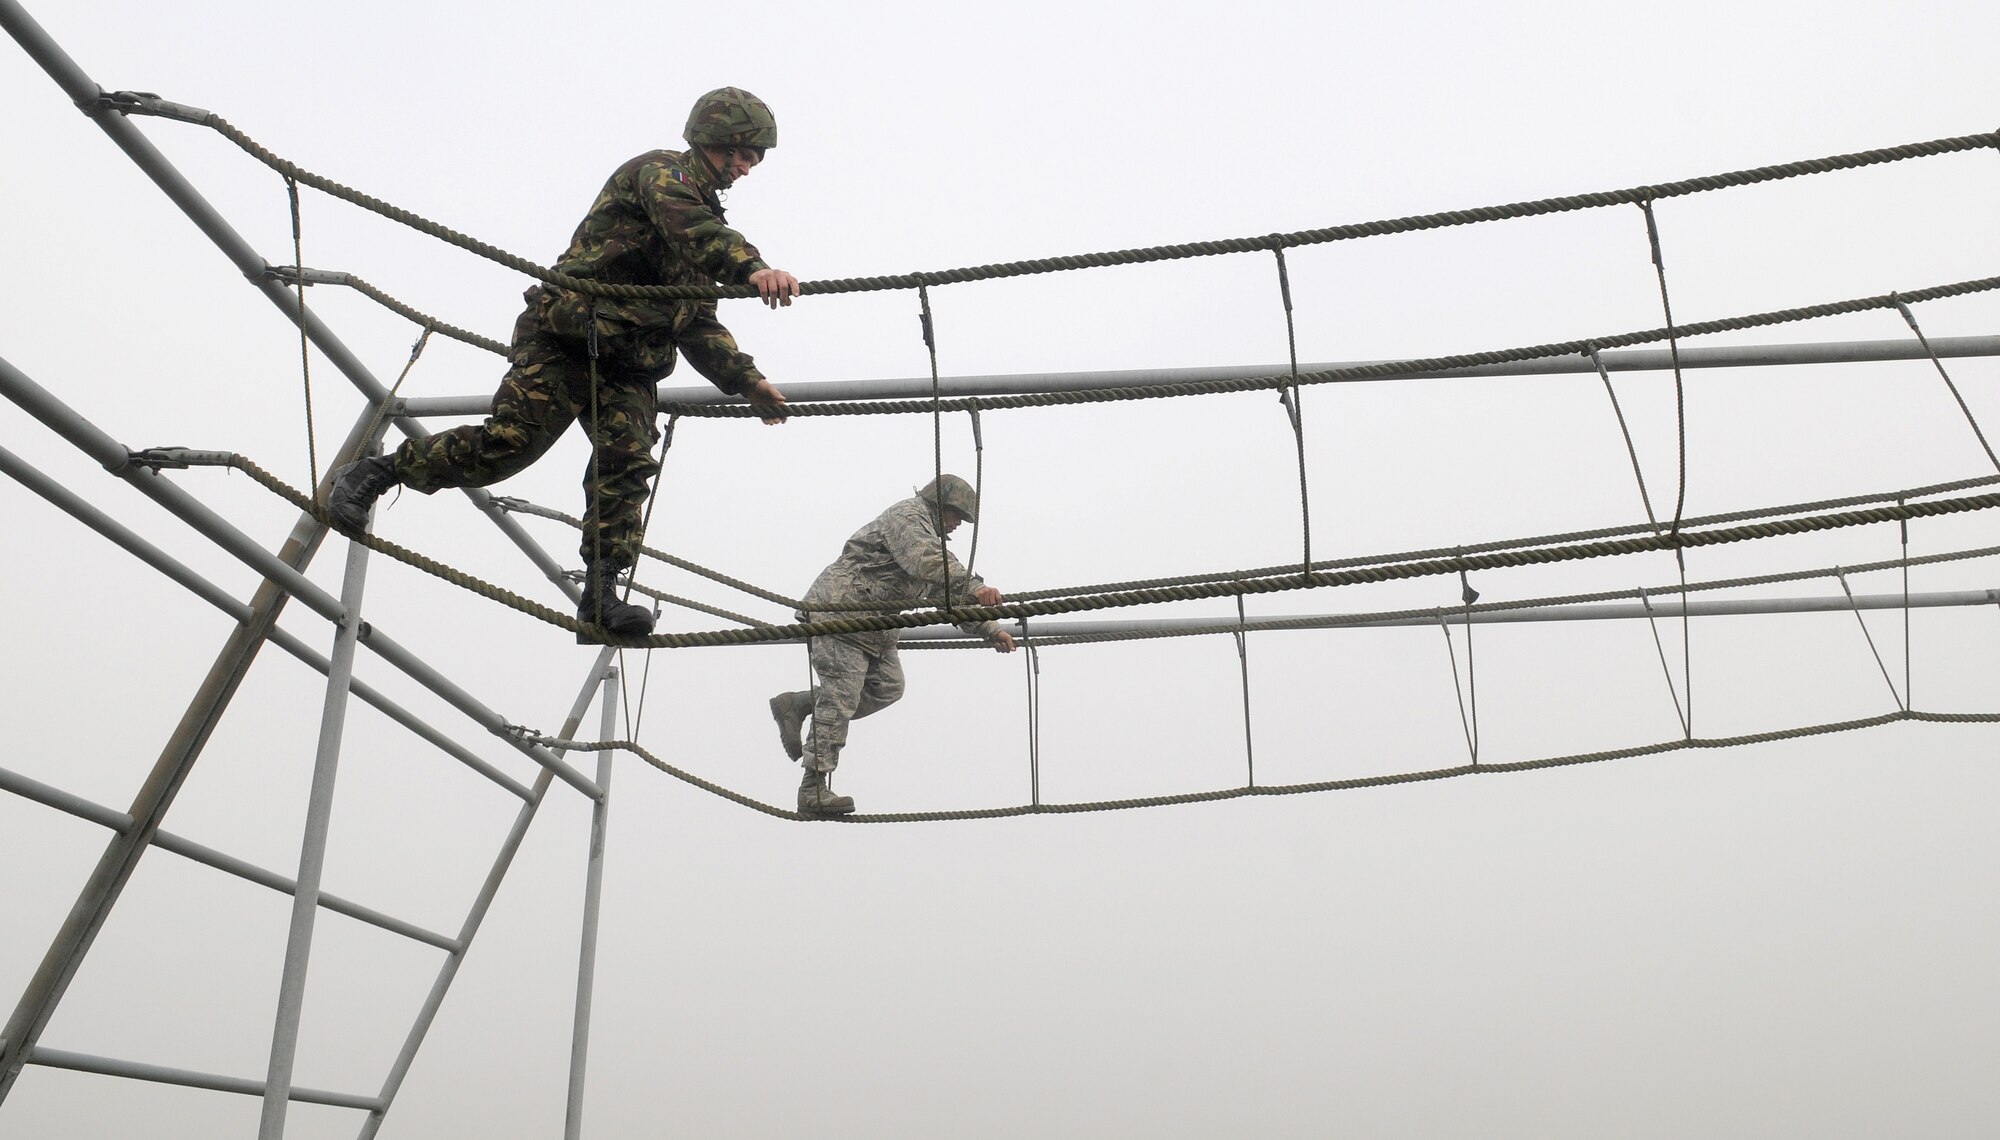 RAF MILDENHALL, England -- A British airman (left) and 1st Lt. Xzavior Hill, 100th Civil Engineer Squadron, traverse a rope bridge as part of the Ultimate Challenge 2 activity of Leadership, Ethos and Air Power Day at RAF Marham Nov. 9. About 40 Airmen from RAFs Mildenhall and Lakenheath participated in the leadership building opportunities with their British counterparts. The event is normally hosted three times a year for RAF troops. The overall goal is to foster teambuilding and teach effective leadership techniques. (U.S. Air Force photo/Senior Airman Thomas Trower)